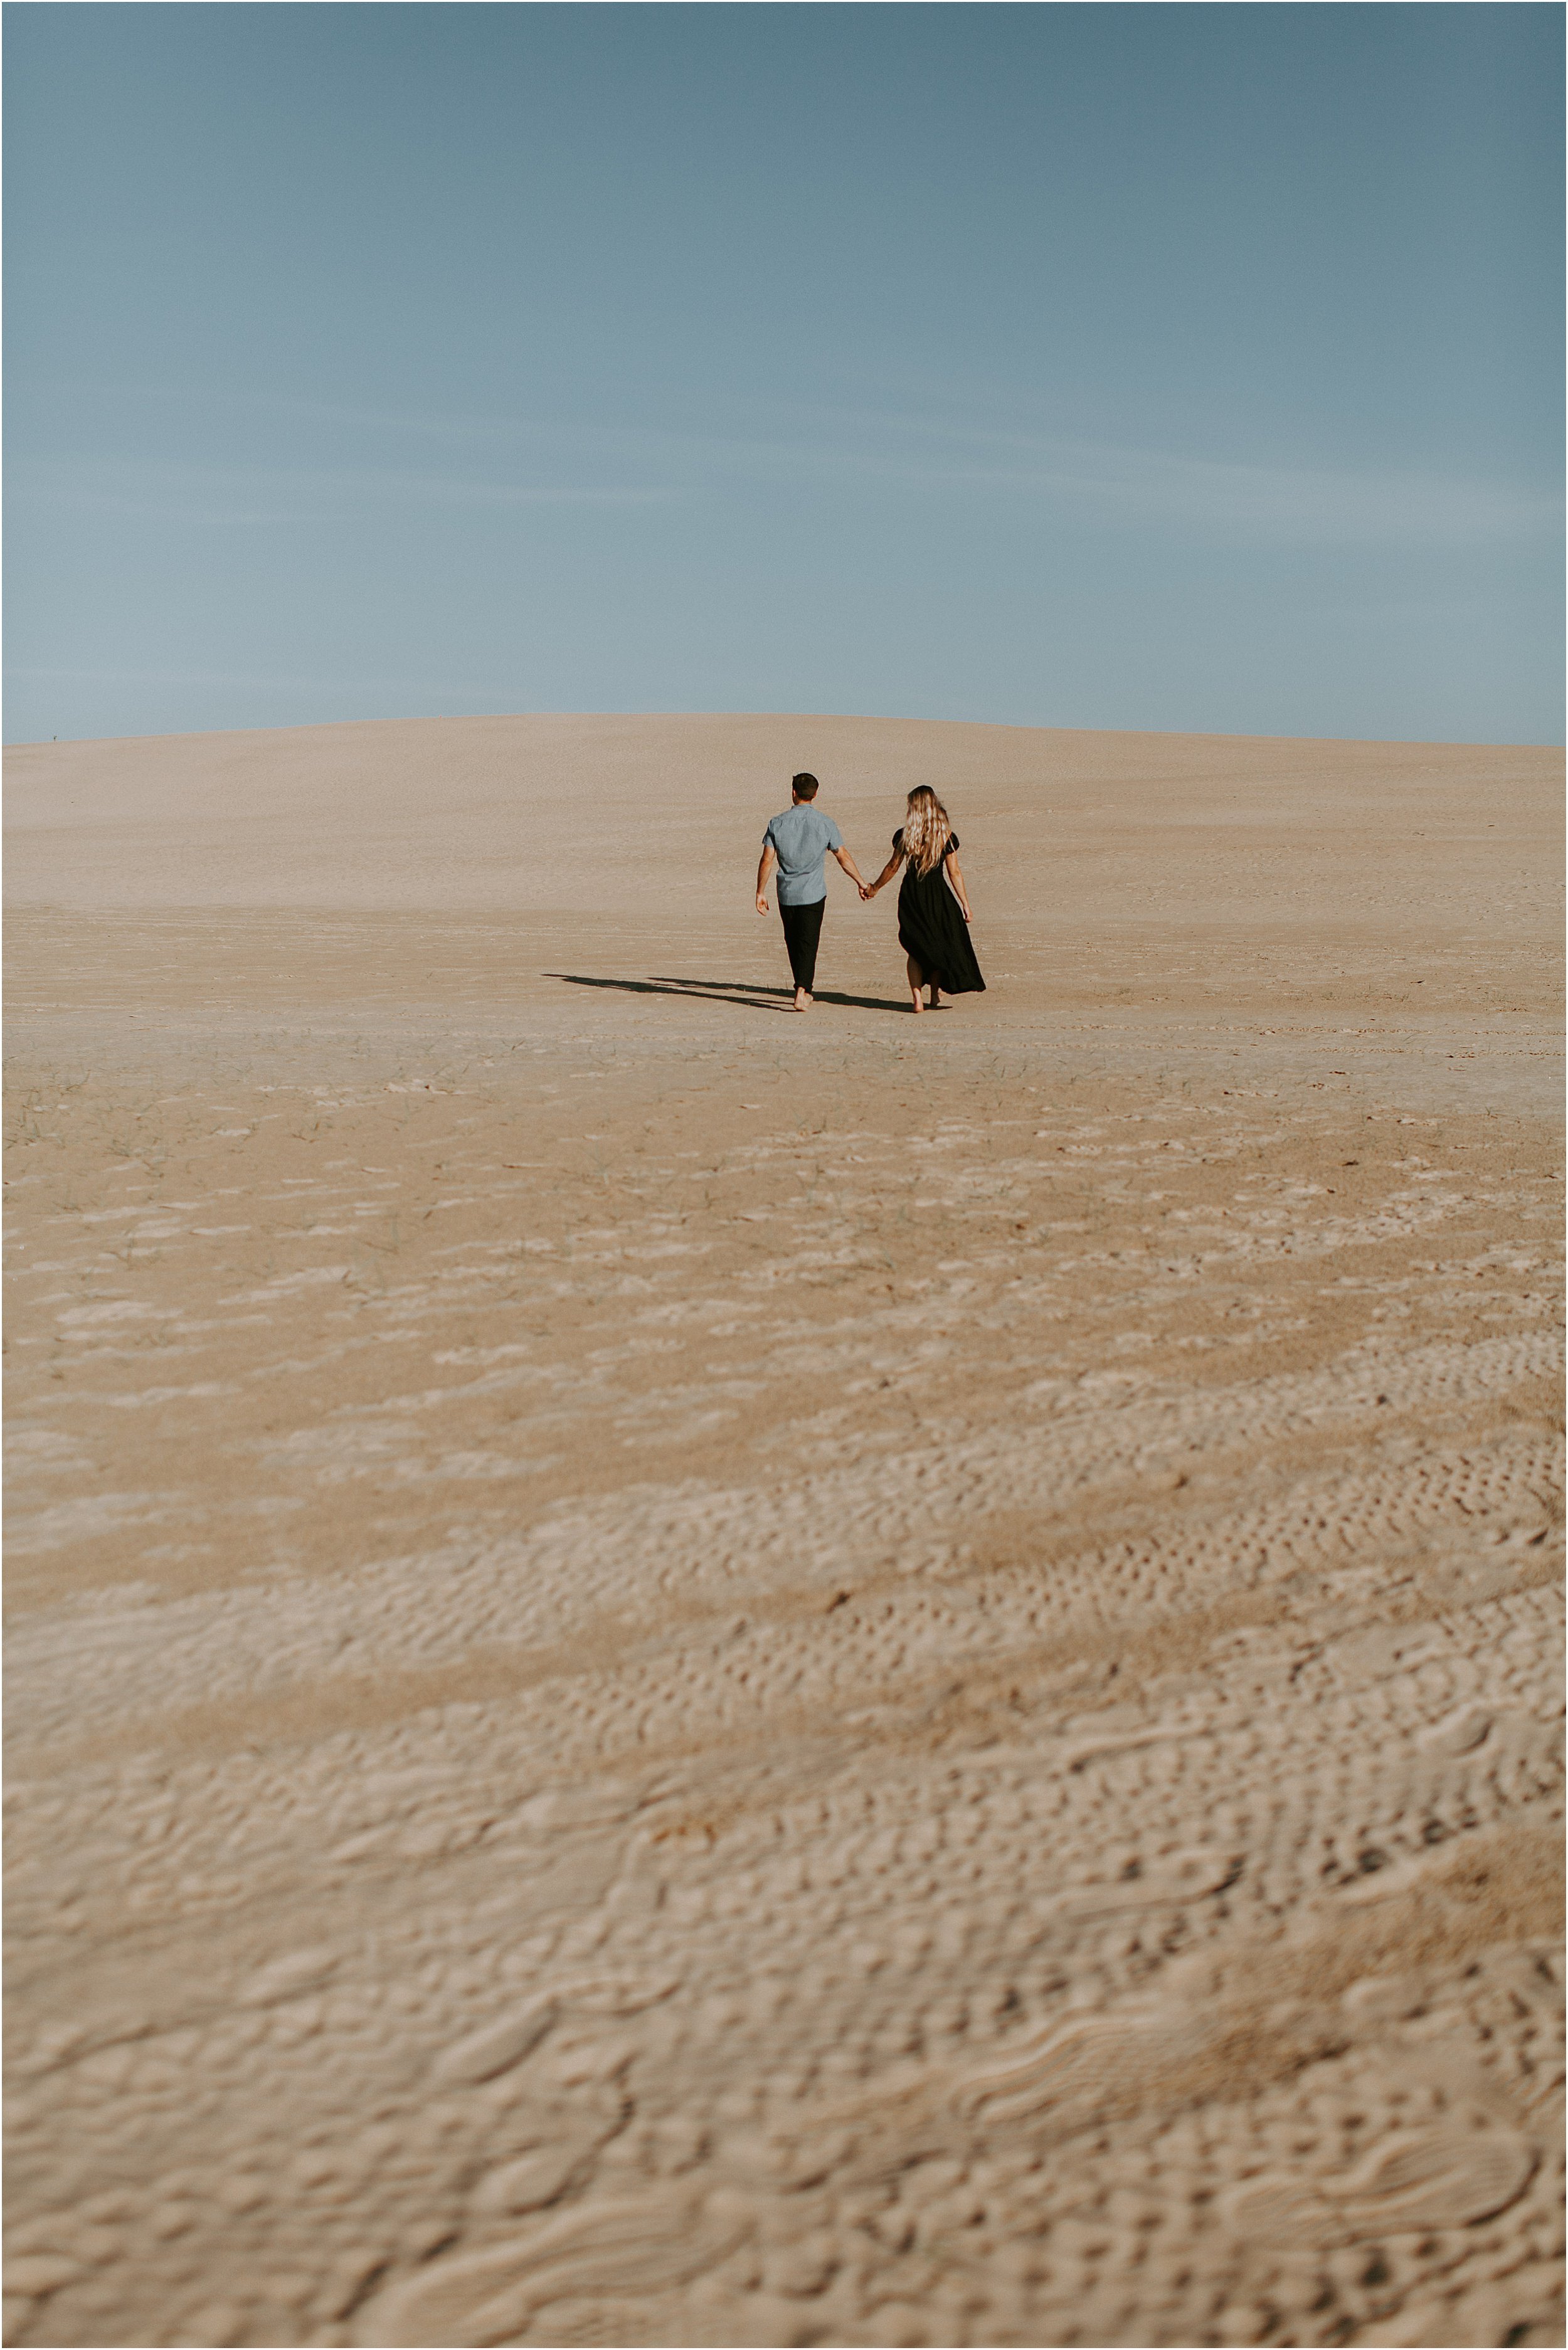  A couple walks hand in hand in the distance alone, along an expansive sand dune.  